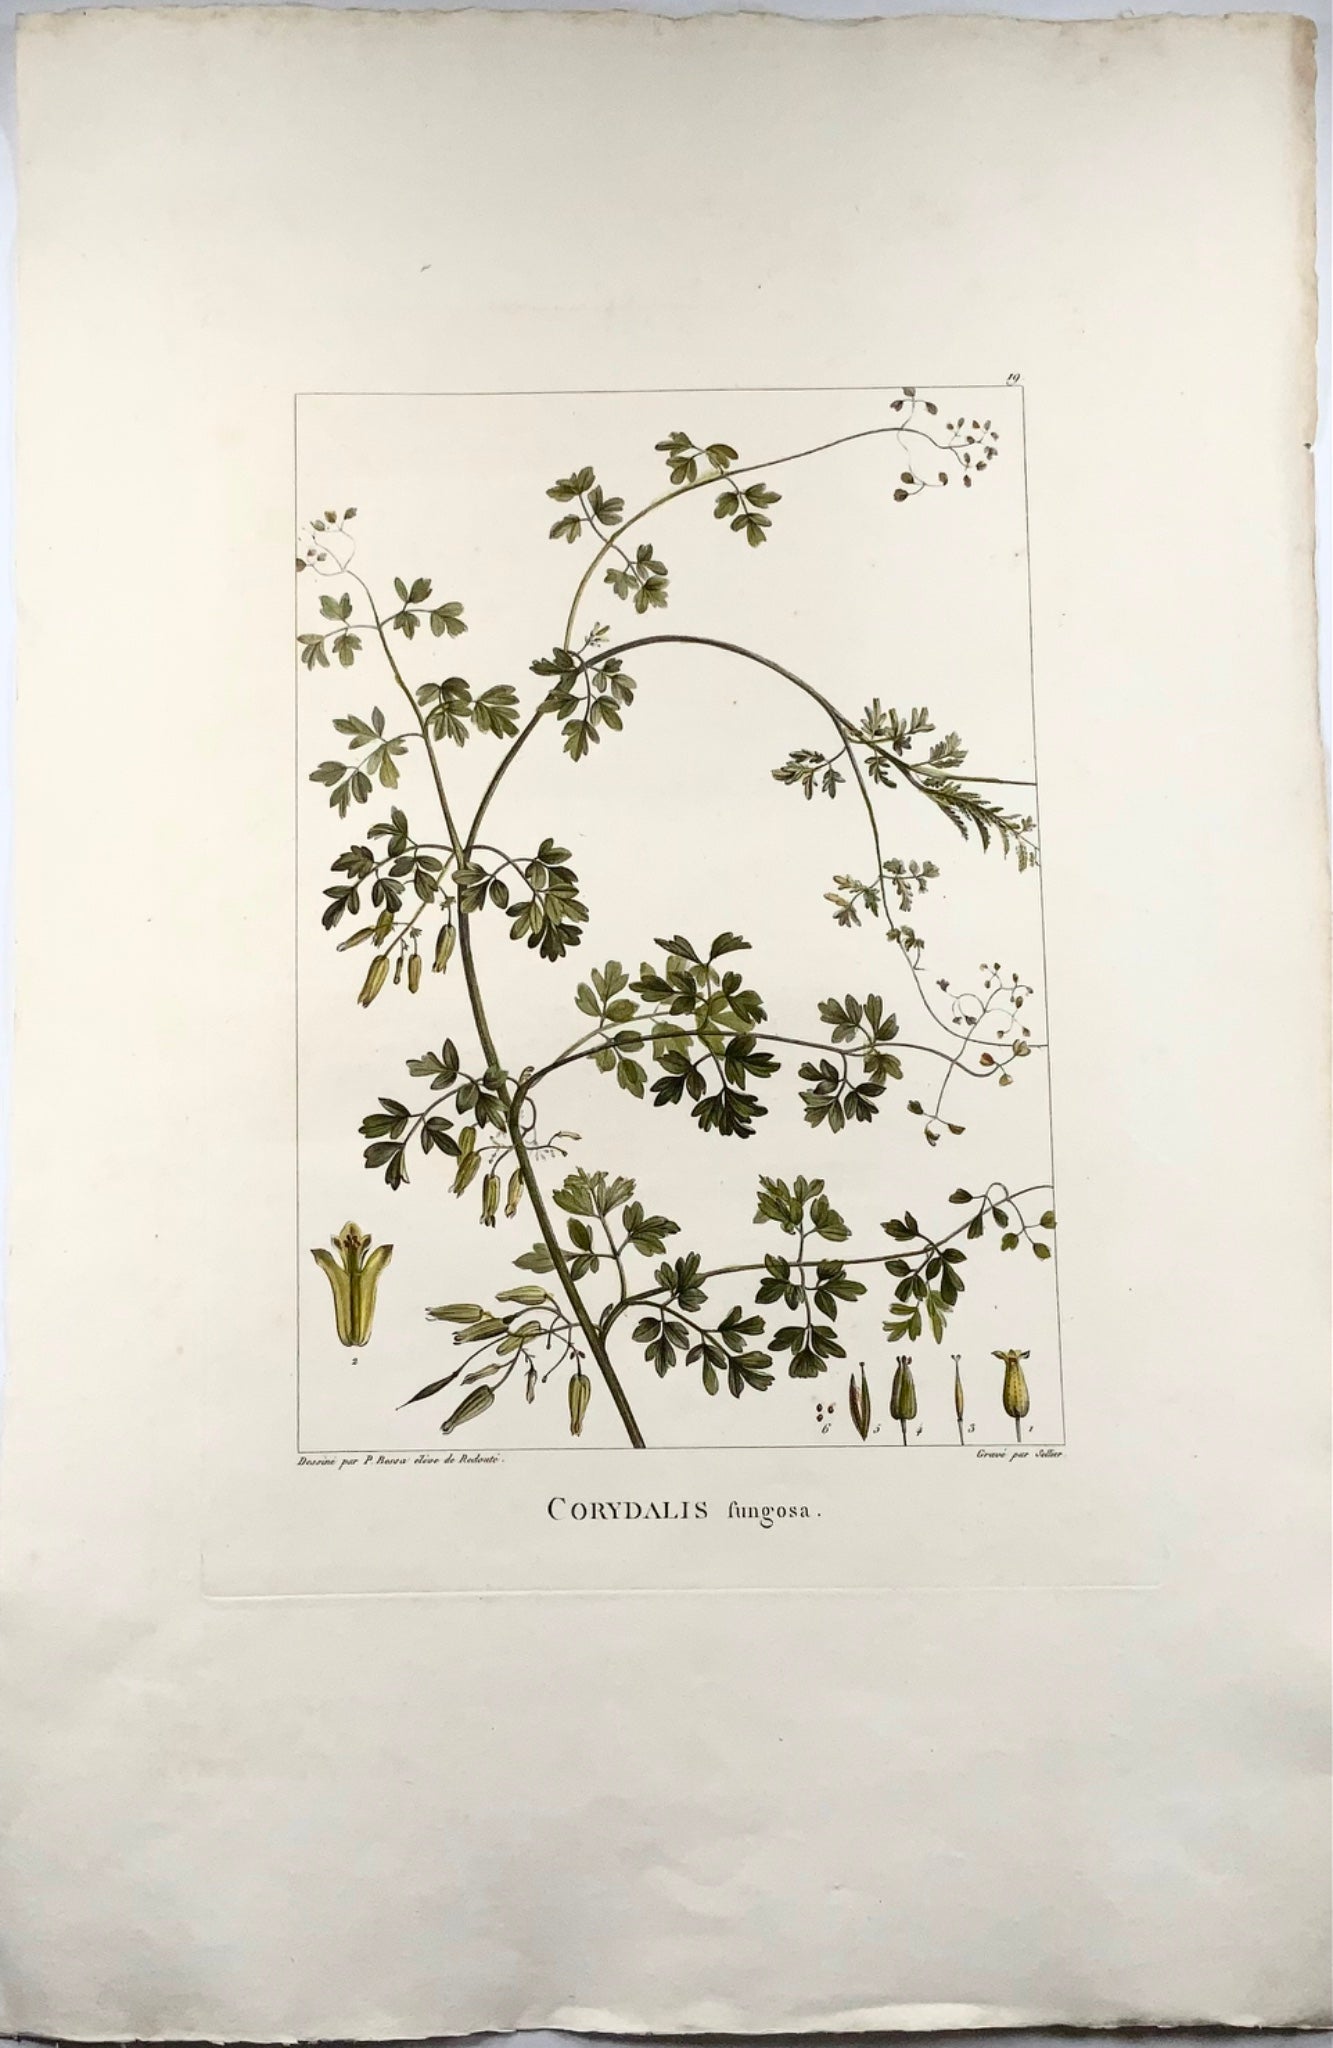 1803 Corydalis, Sellier after Bessa and Redoute, 51x34 cm, hand colored, botany